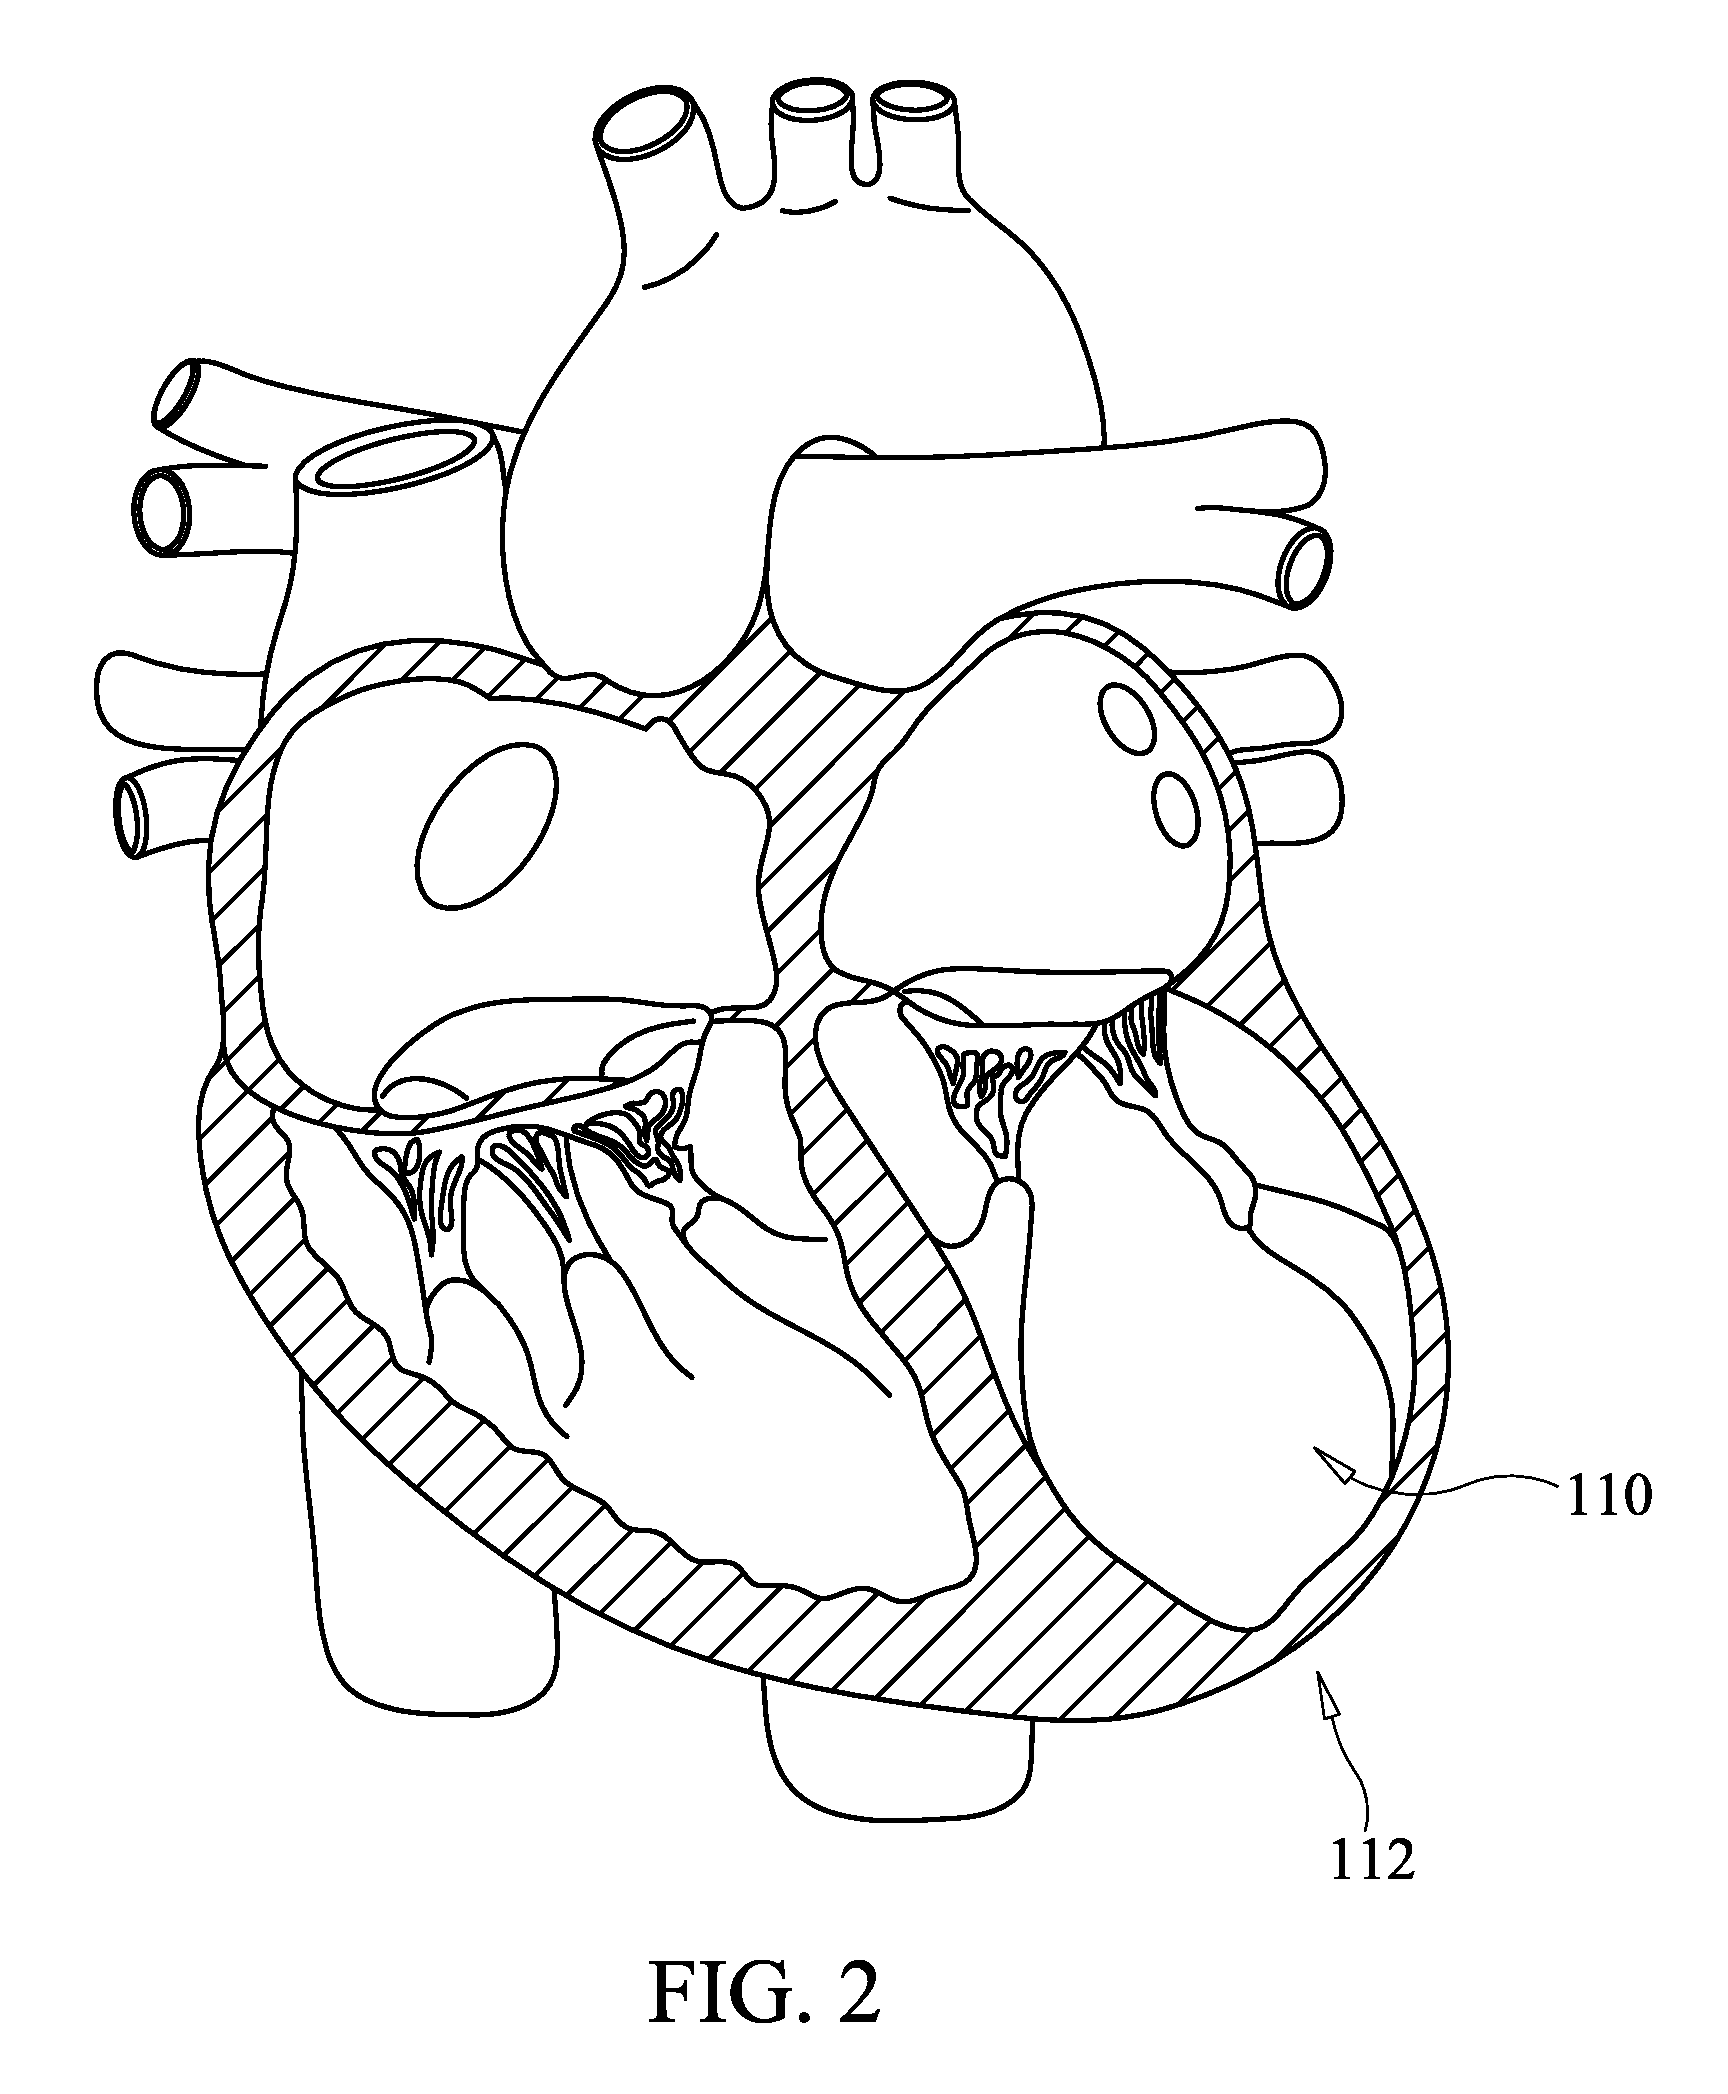 Apical Papillary Msucle Attachment for Left Ventricular Reduction